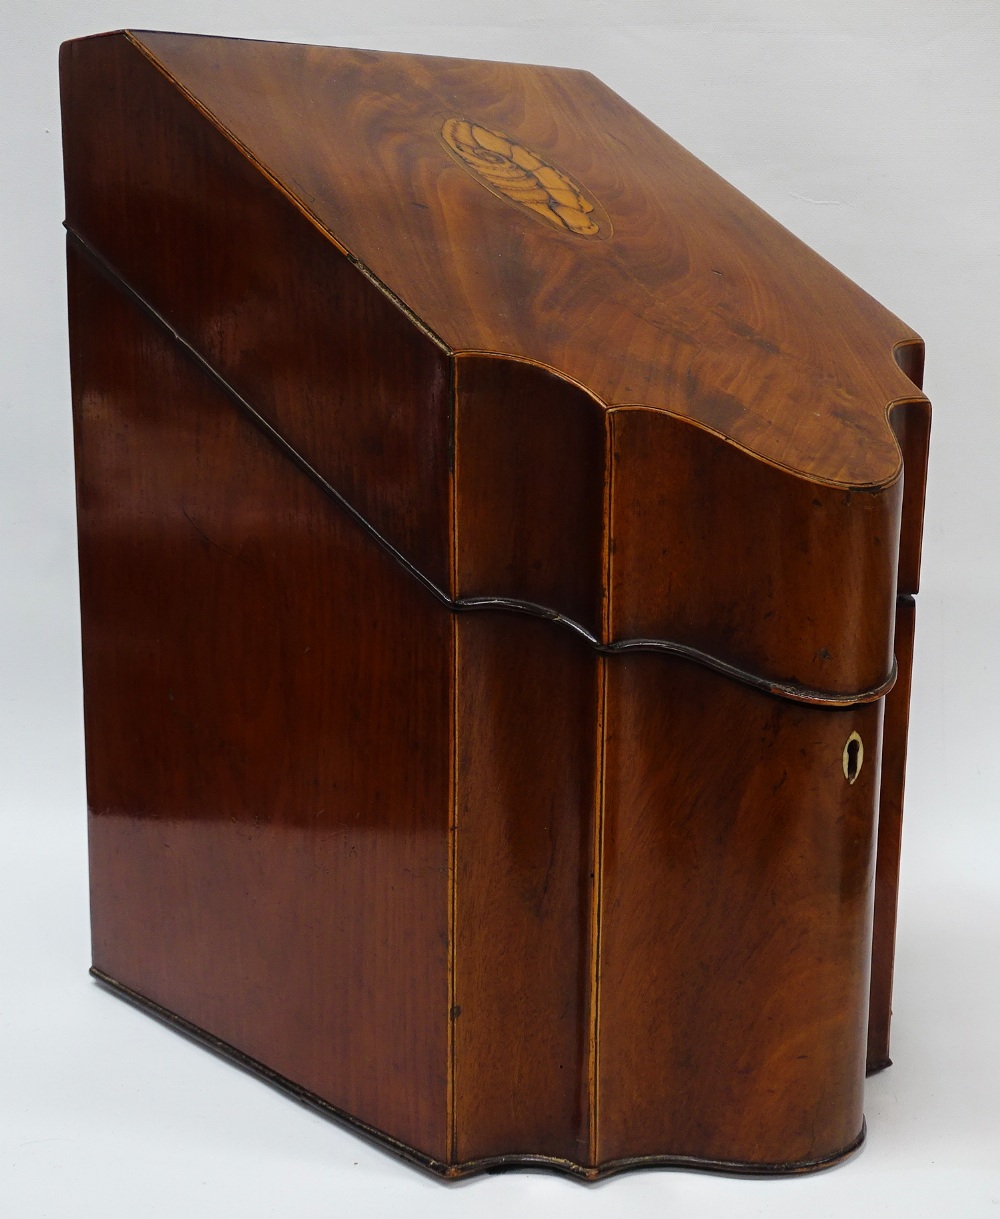 A Late 18th Century Knife Box - A Sheriton inlaid mahogany bow fronted box opening to reveal a spoon - Image 2 of 4